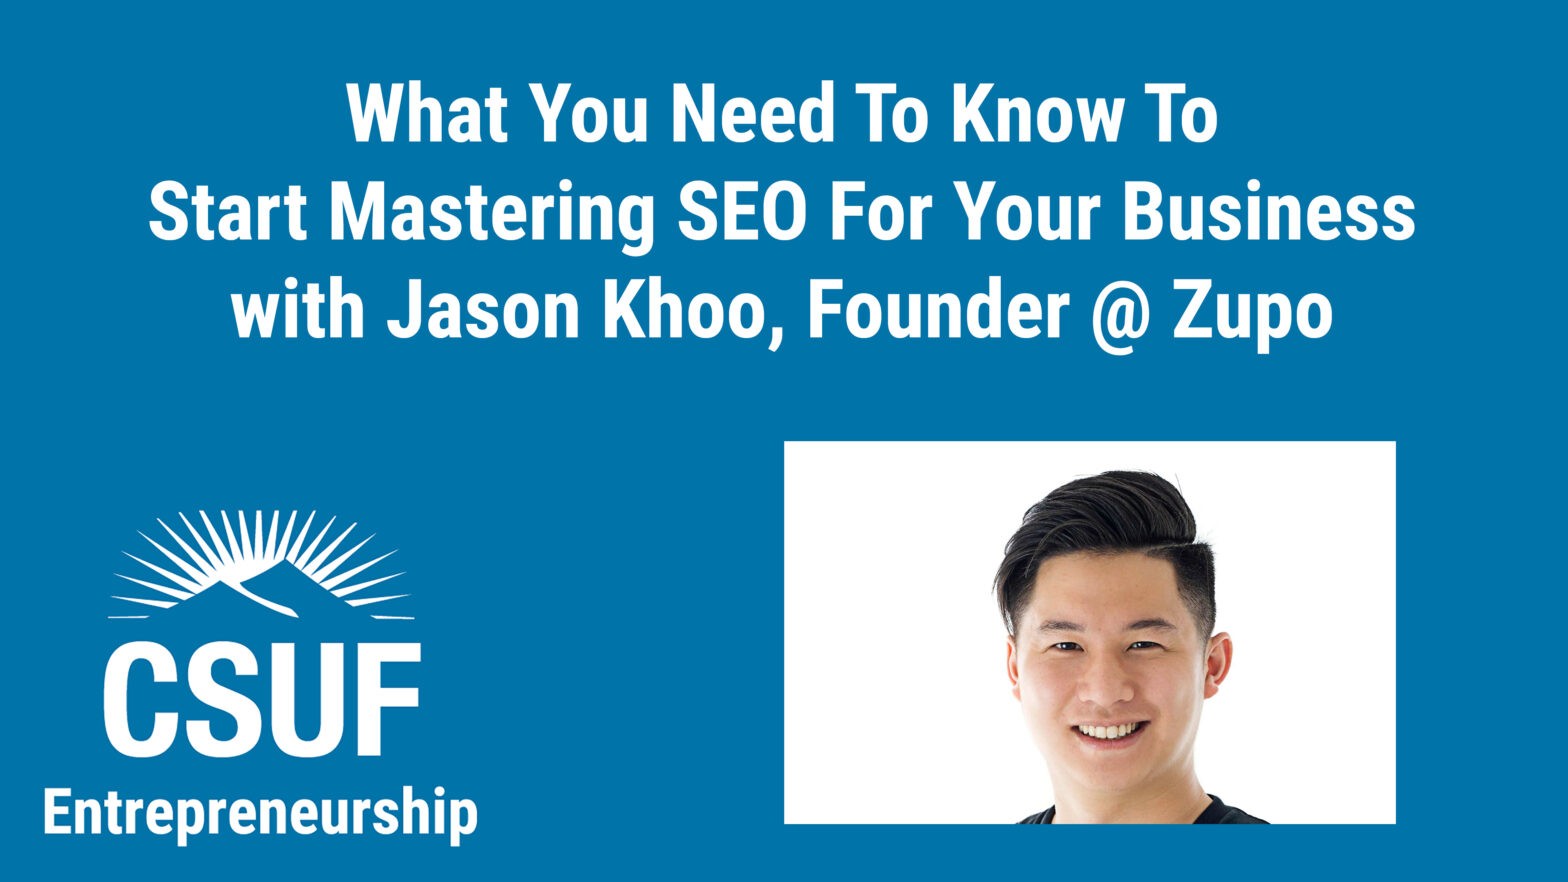 What You Should Know To Start Mastering SEO For Your Business